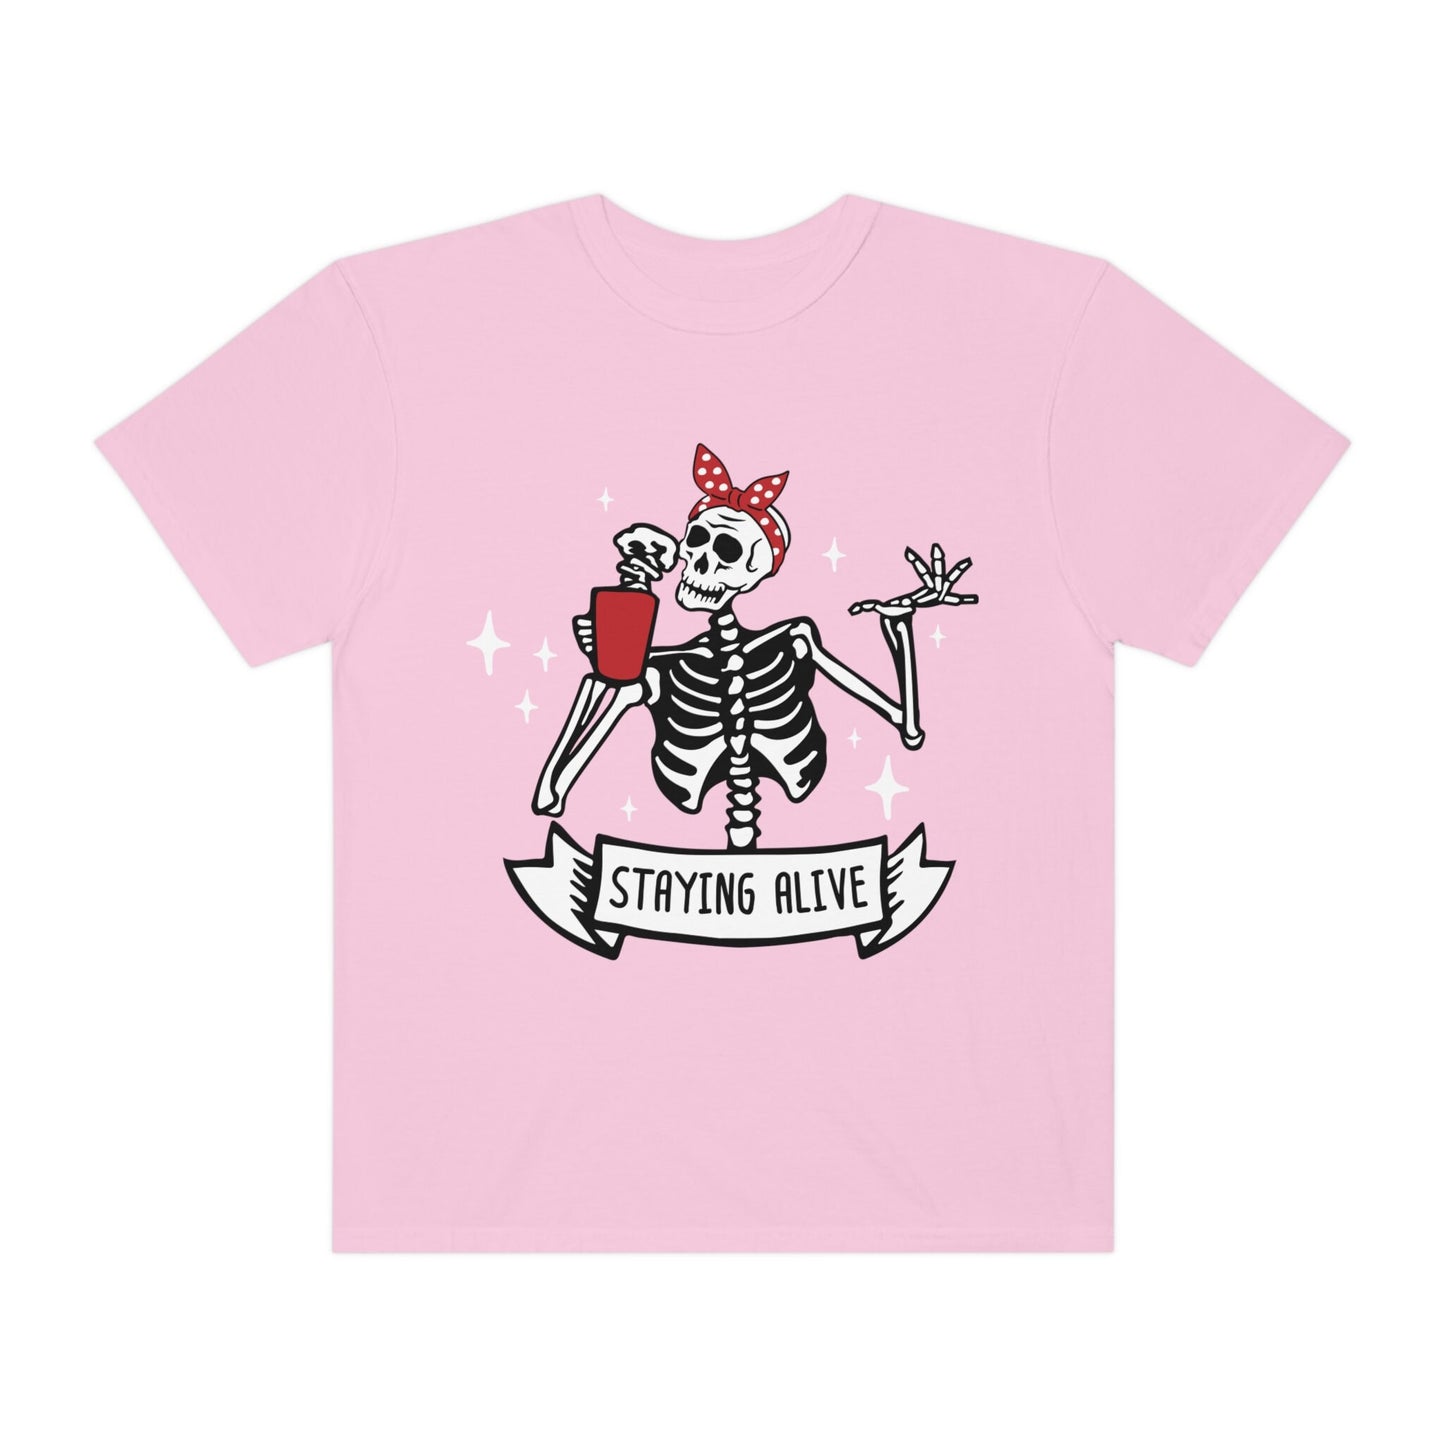 Staying Alive Shirt, Trendy Coffee Shirt, Funny Skeleton T-Shirt, Coffee Lovers Gift, Skull Vintage Tshirt for Women, Comfort Colors Tee